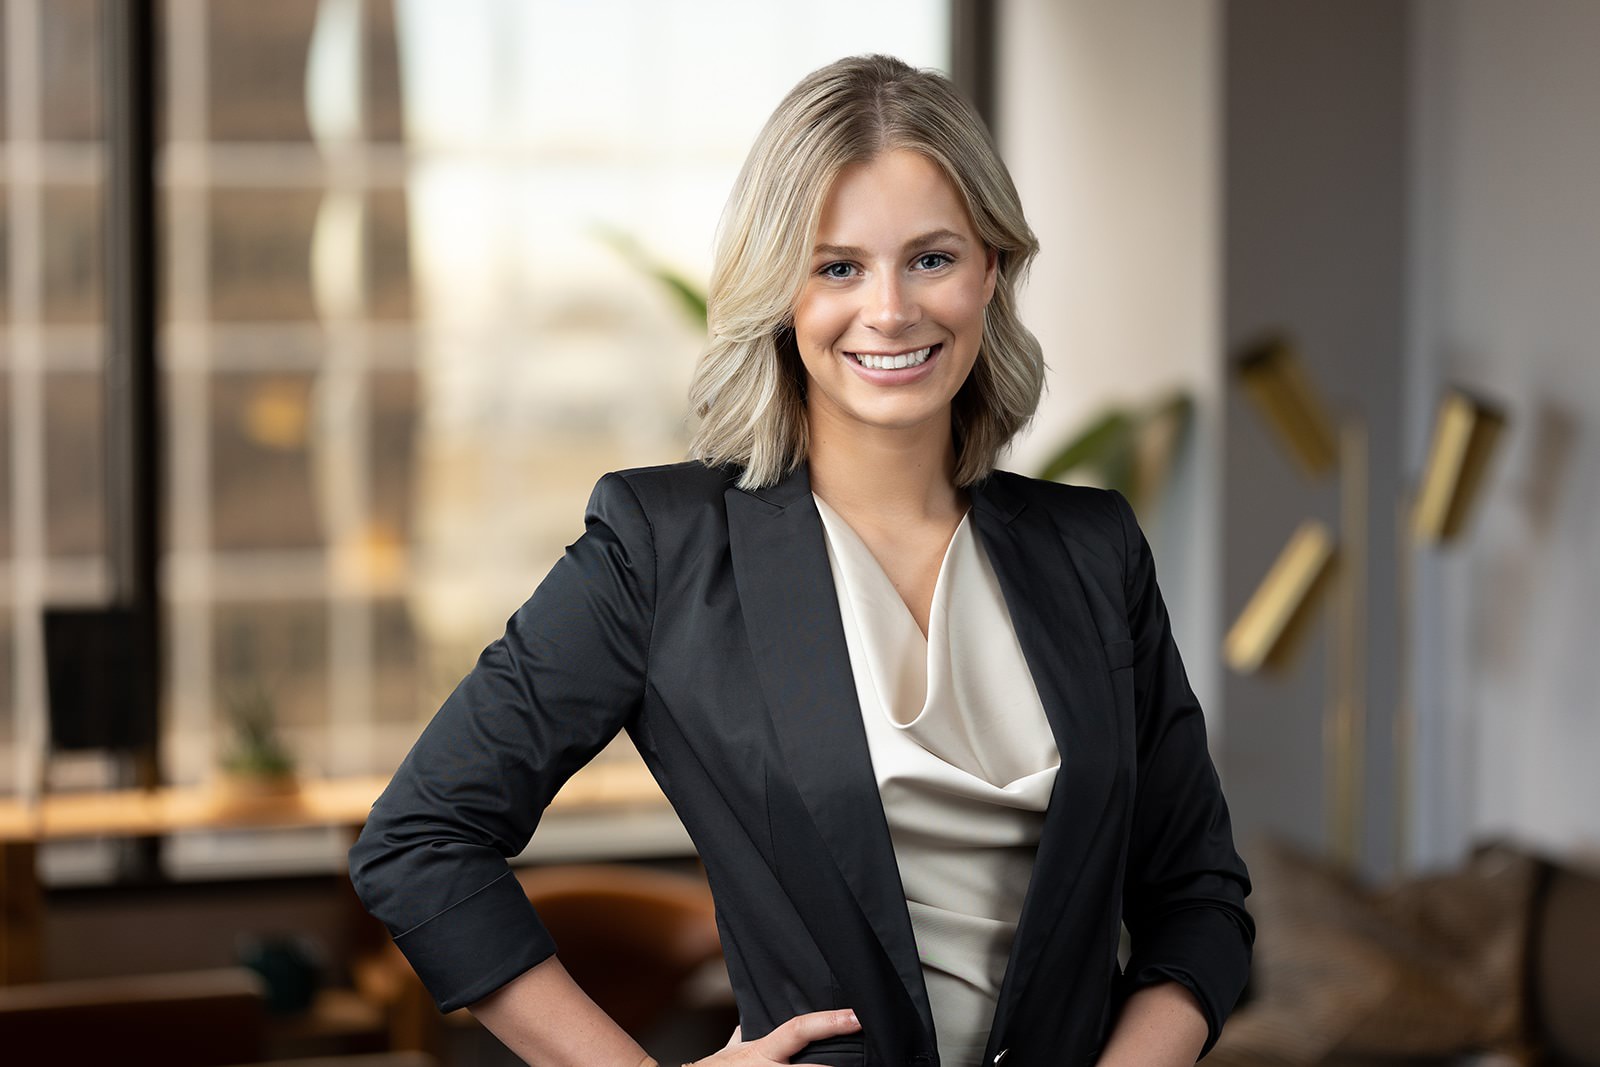 a business woman in a suit standing in an office.